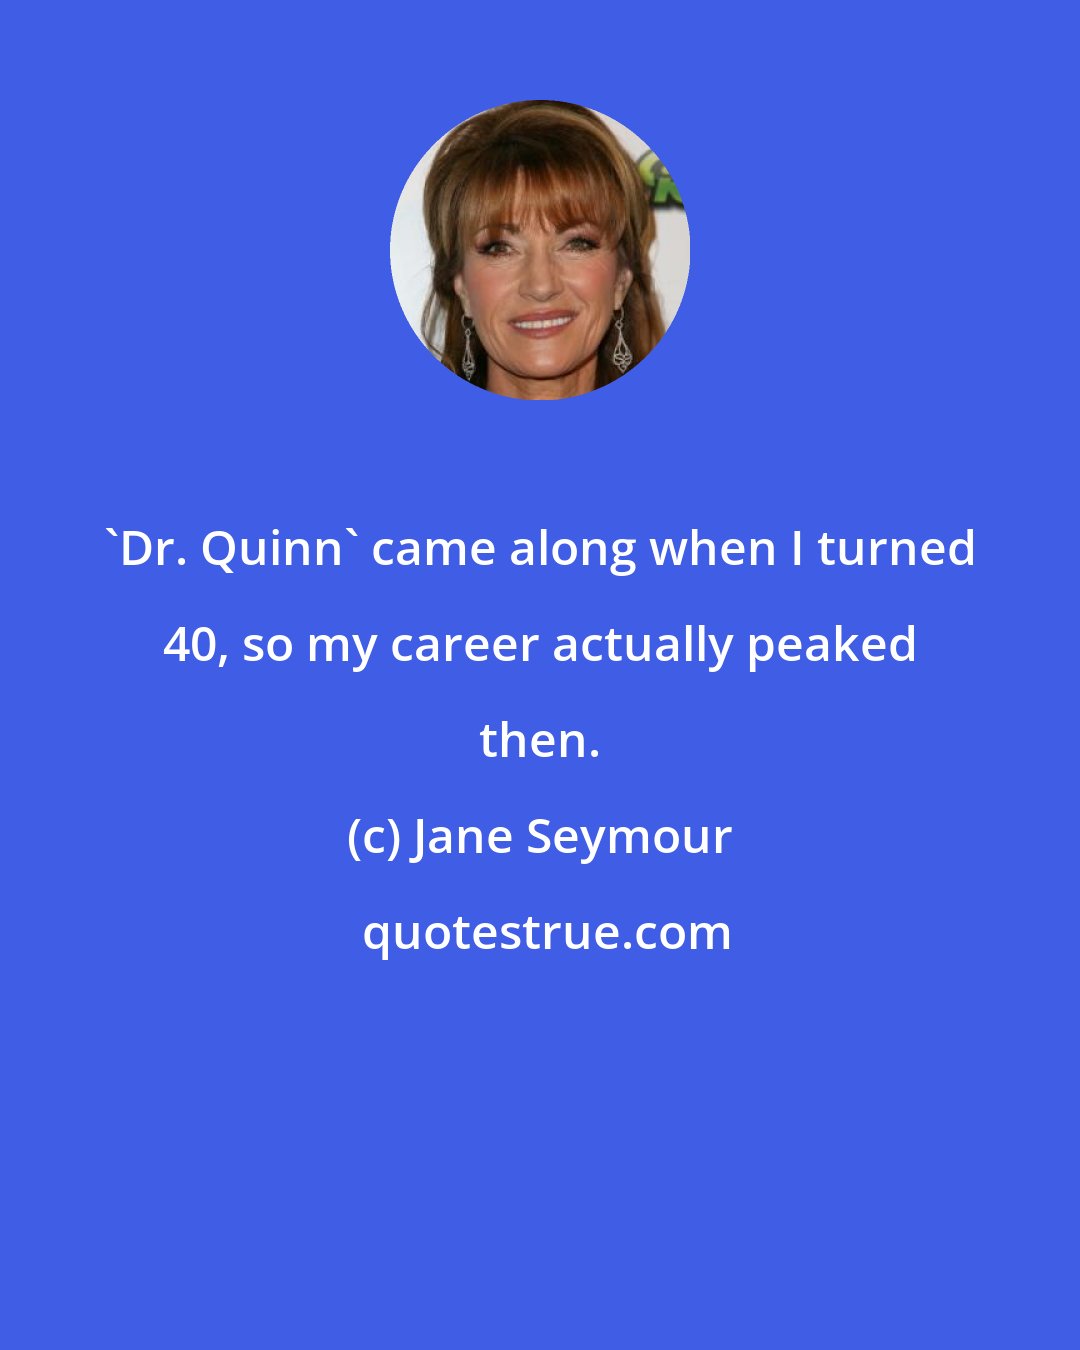 Jane Seymour: 'Dr. Quinn' came along when I turned 40, so my career actually peaked then.